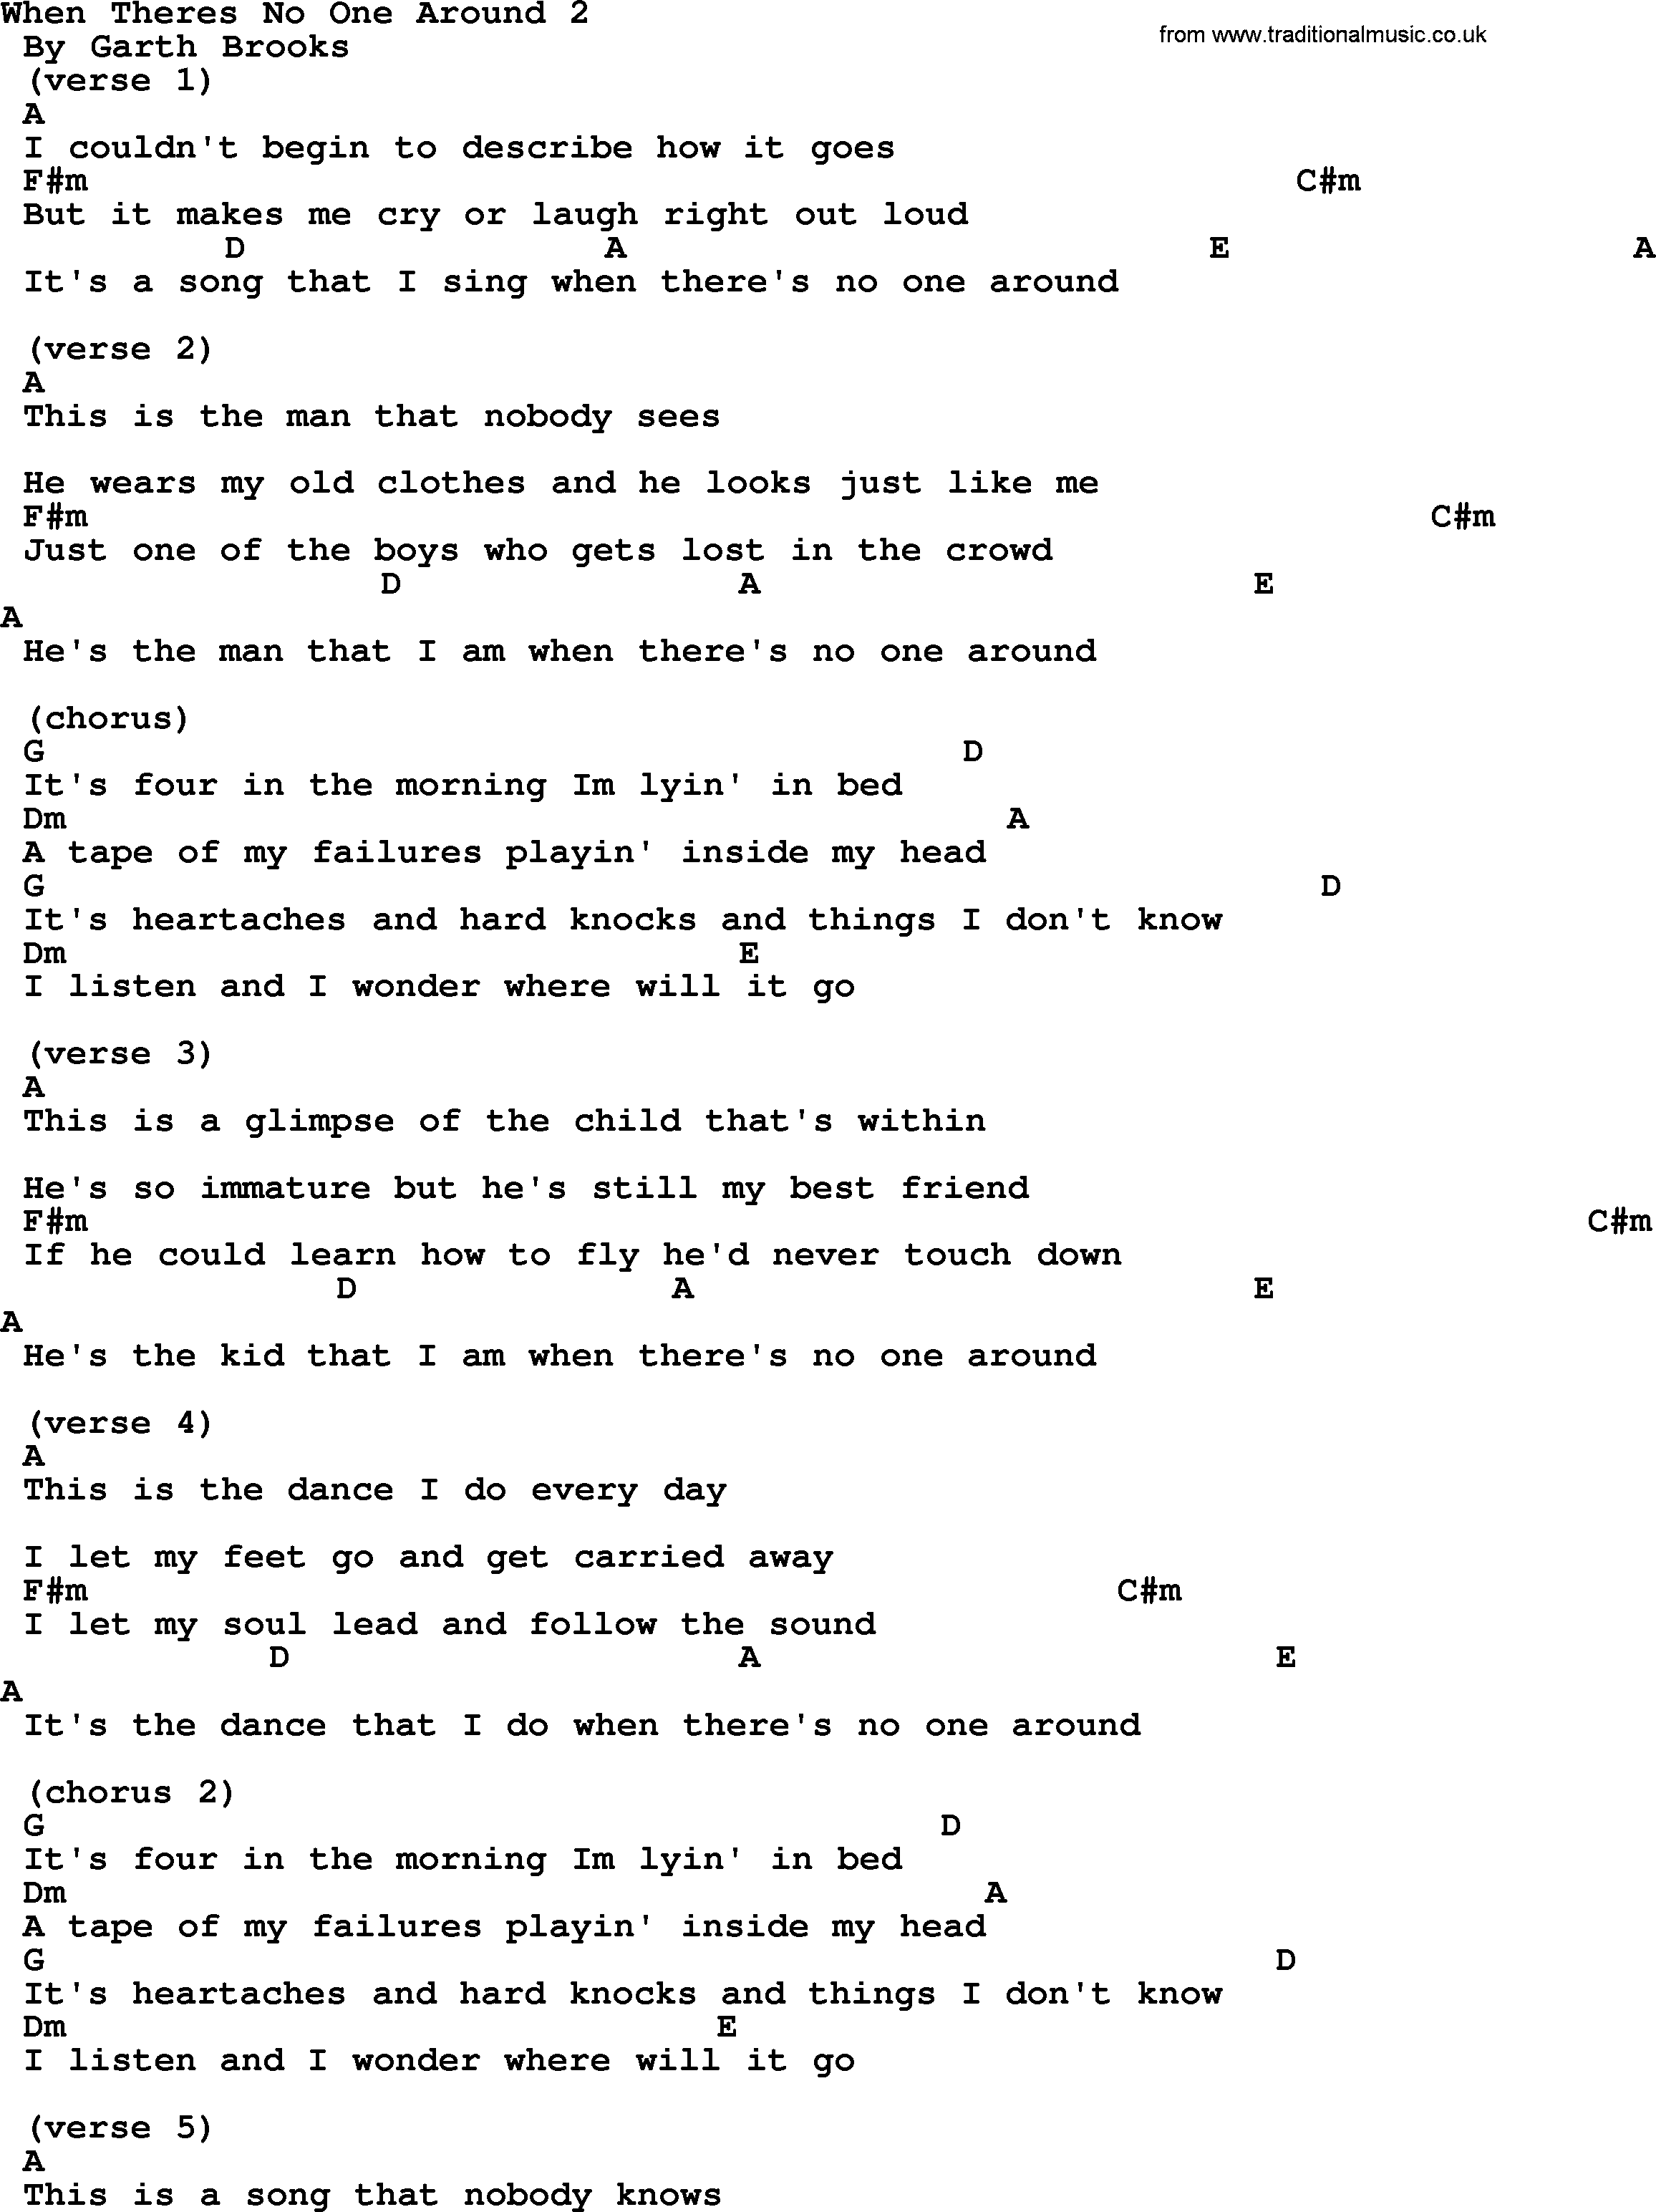 Garth Brooks song: When Theres No One Around 2, lyrics and chords